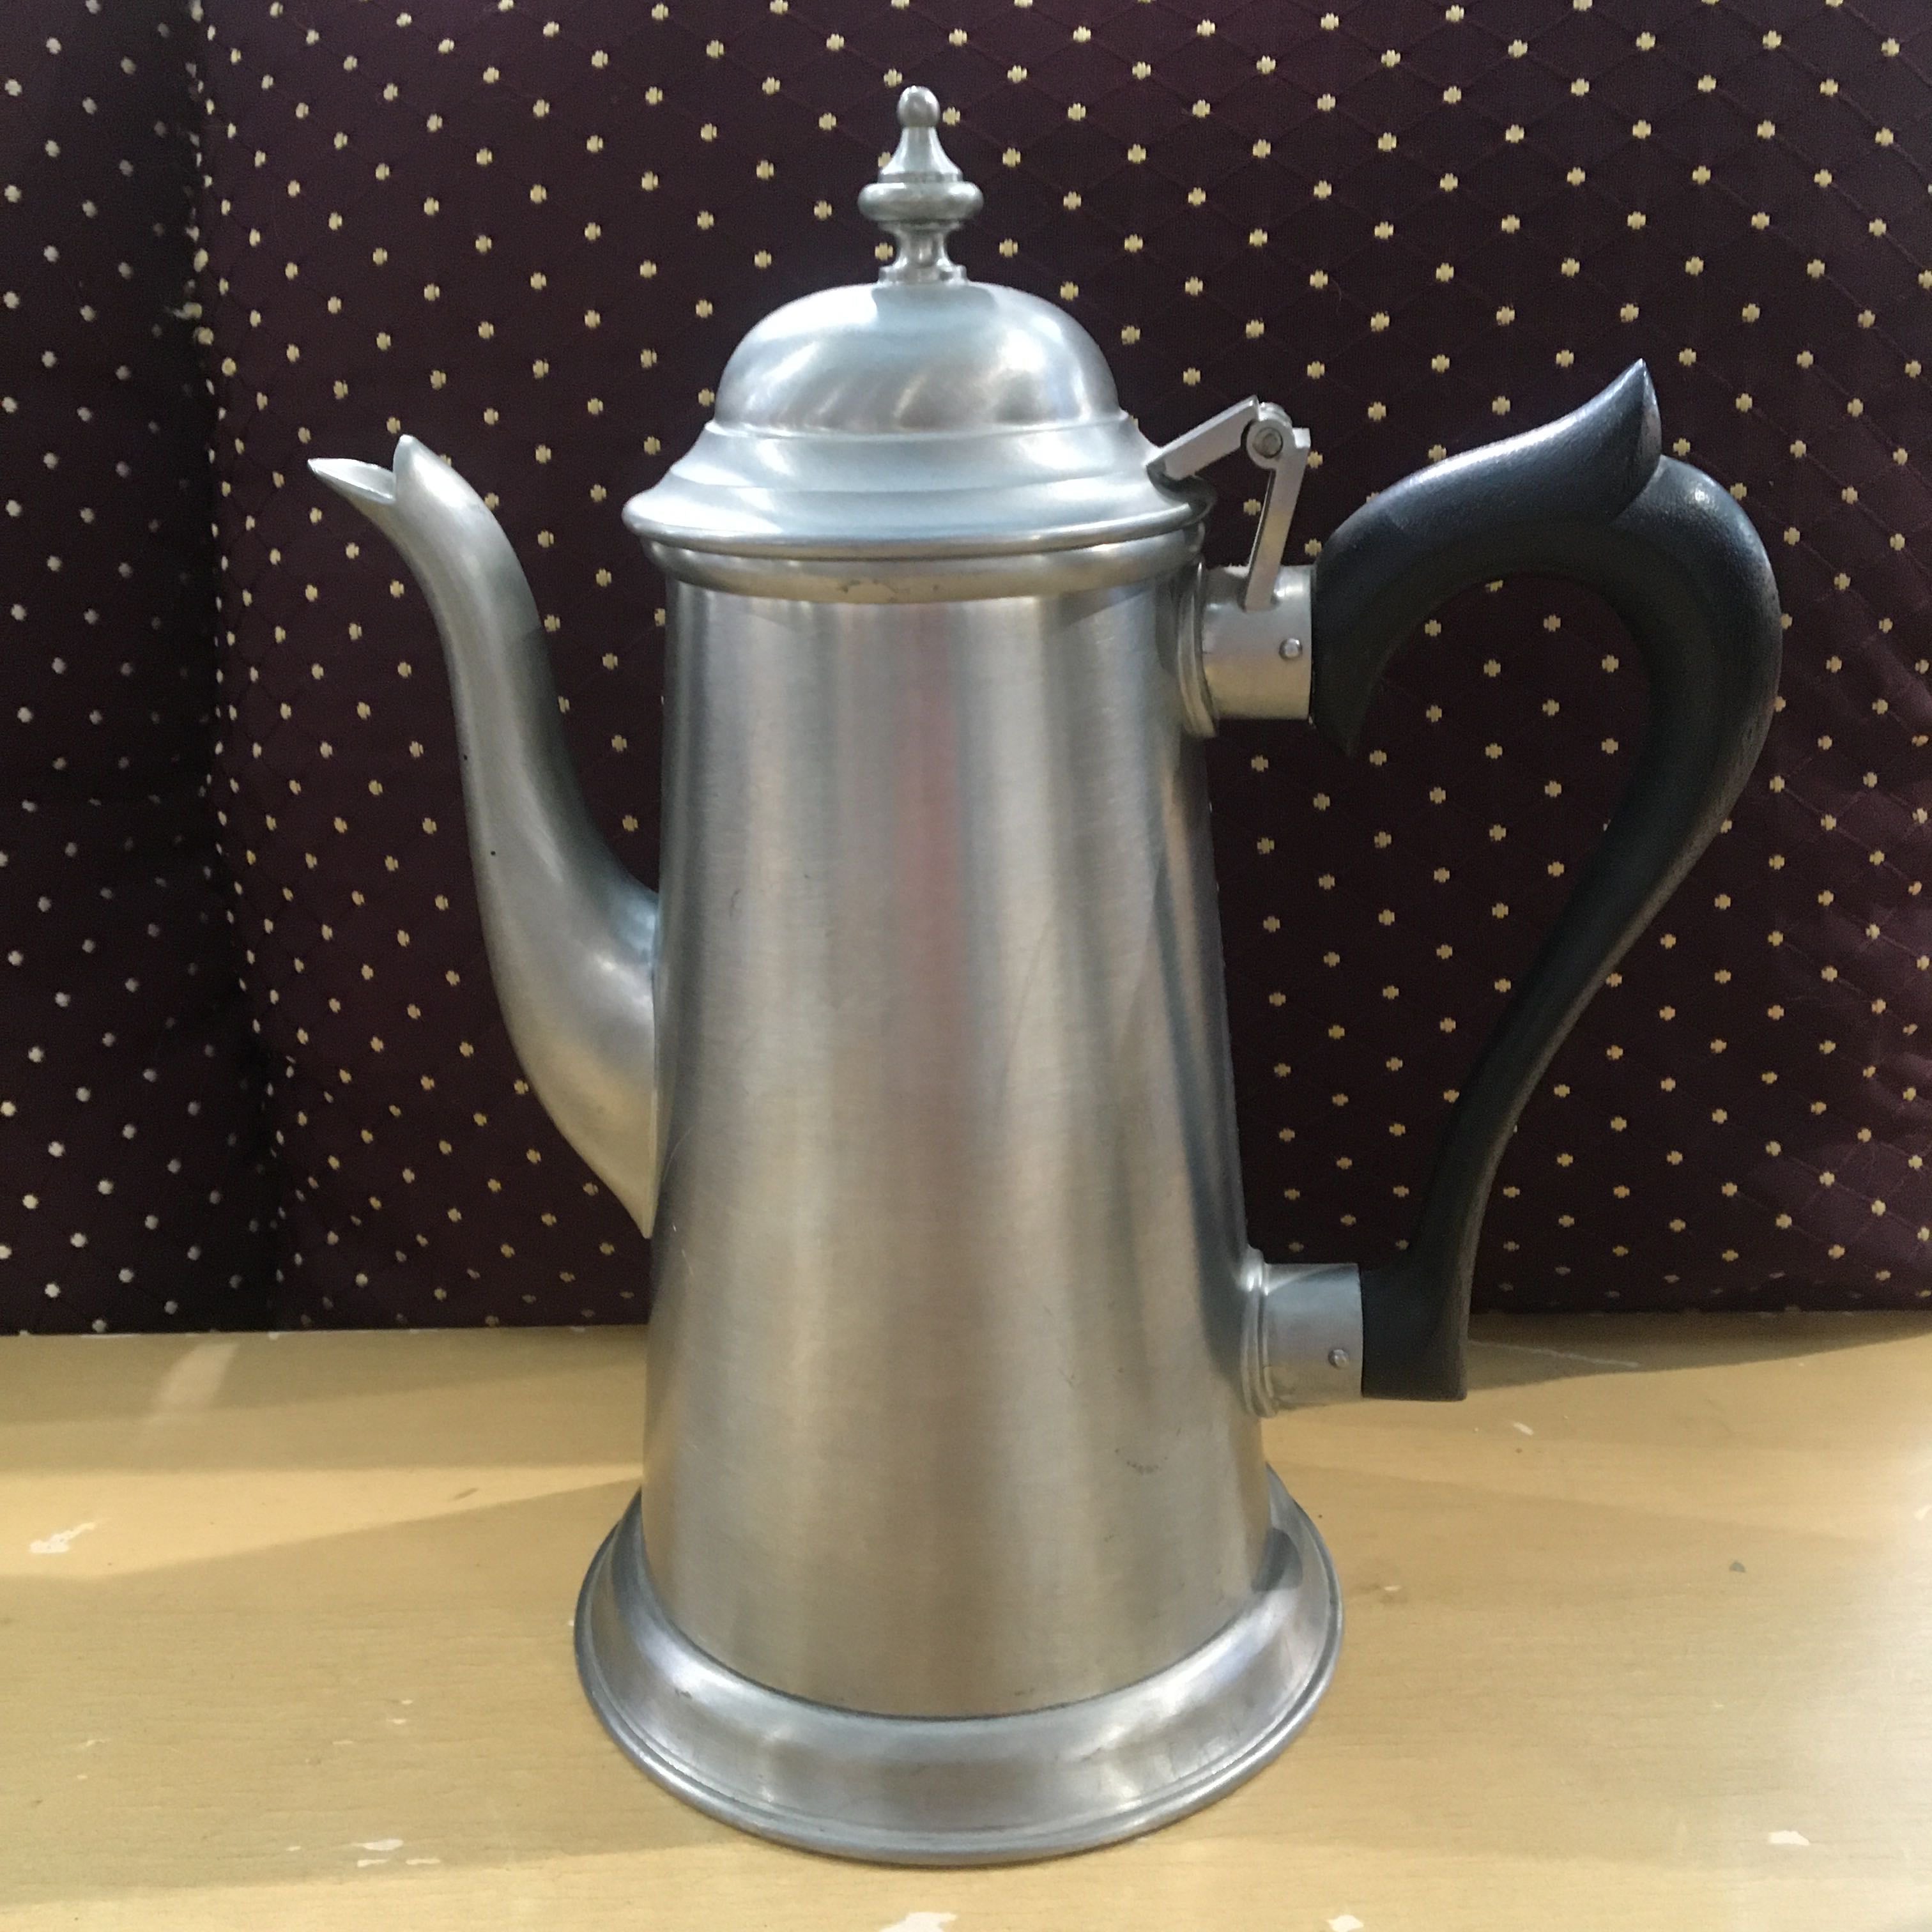 3 Piece Kirk Stieff Pewter Traditional Colonial Coffee Tea with Creamer and Sugar Kitchenware